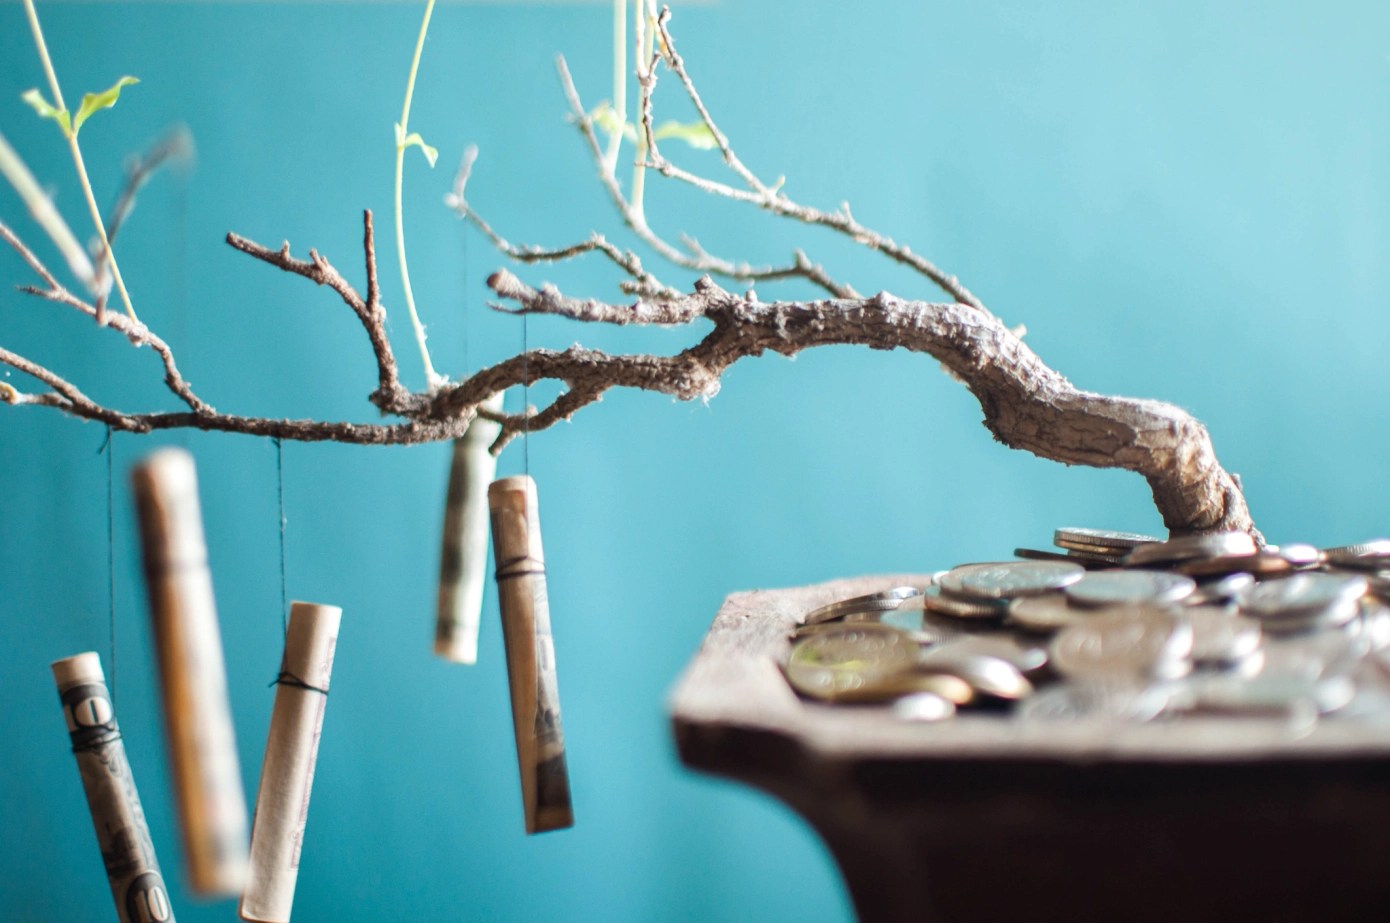 Rounded dollar bills hang from a bonsai tree.